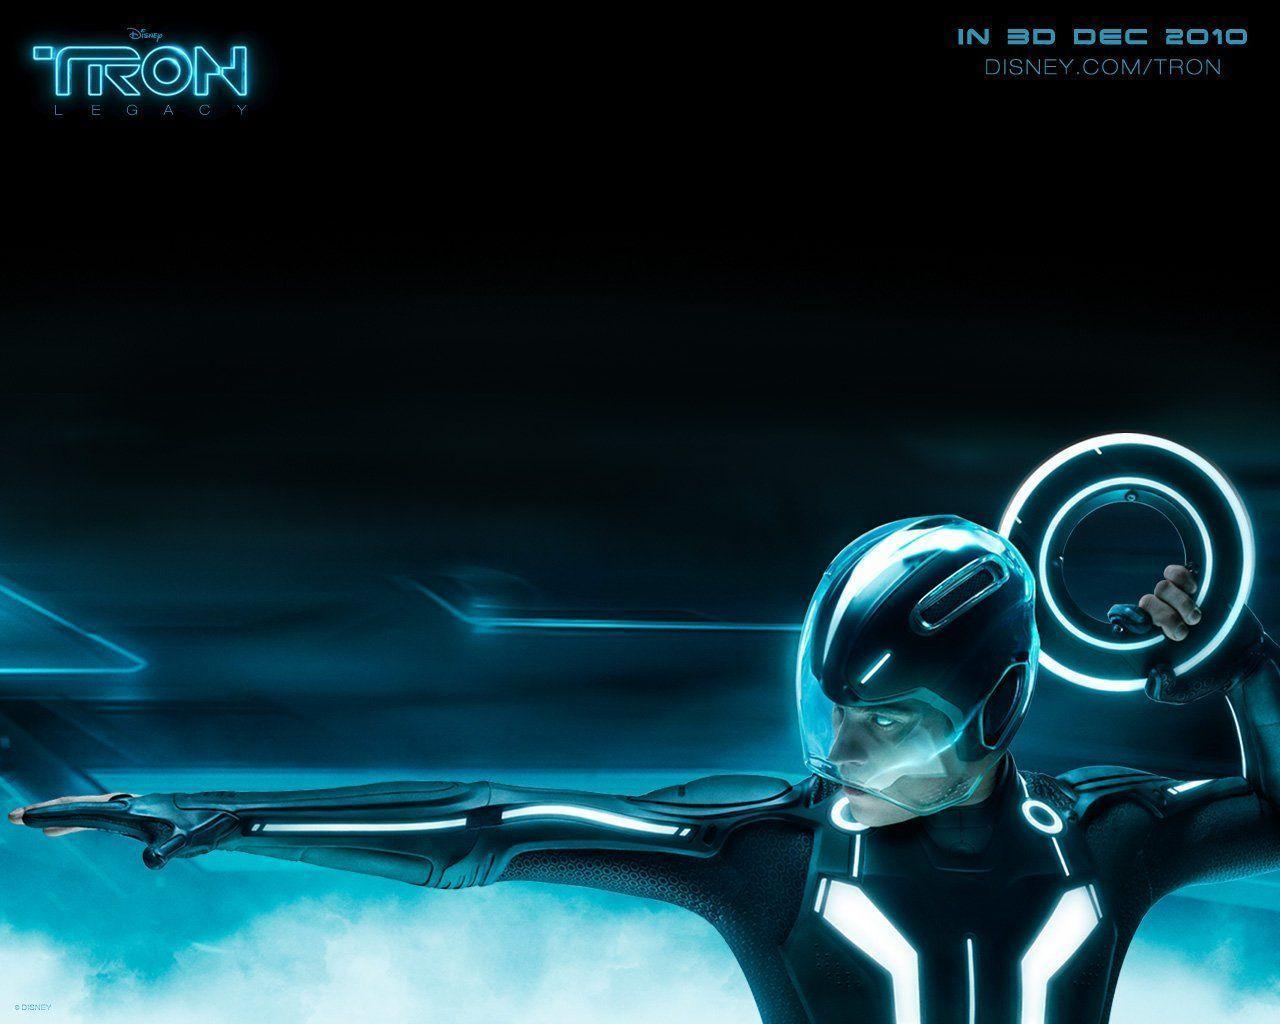 Tron: Legacy (2010). American science fiction action films